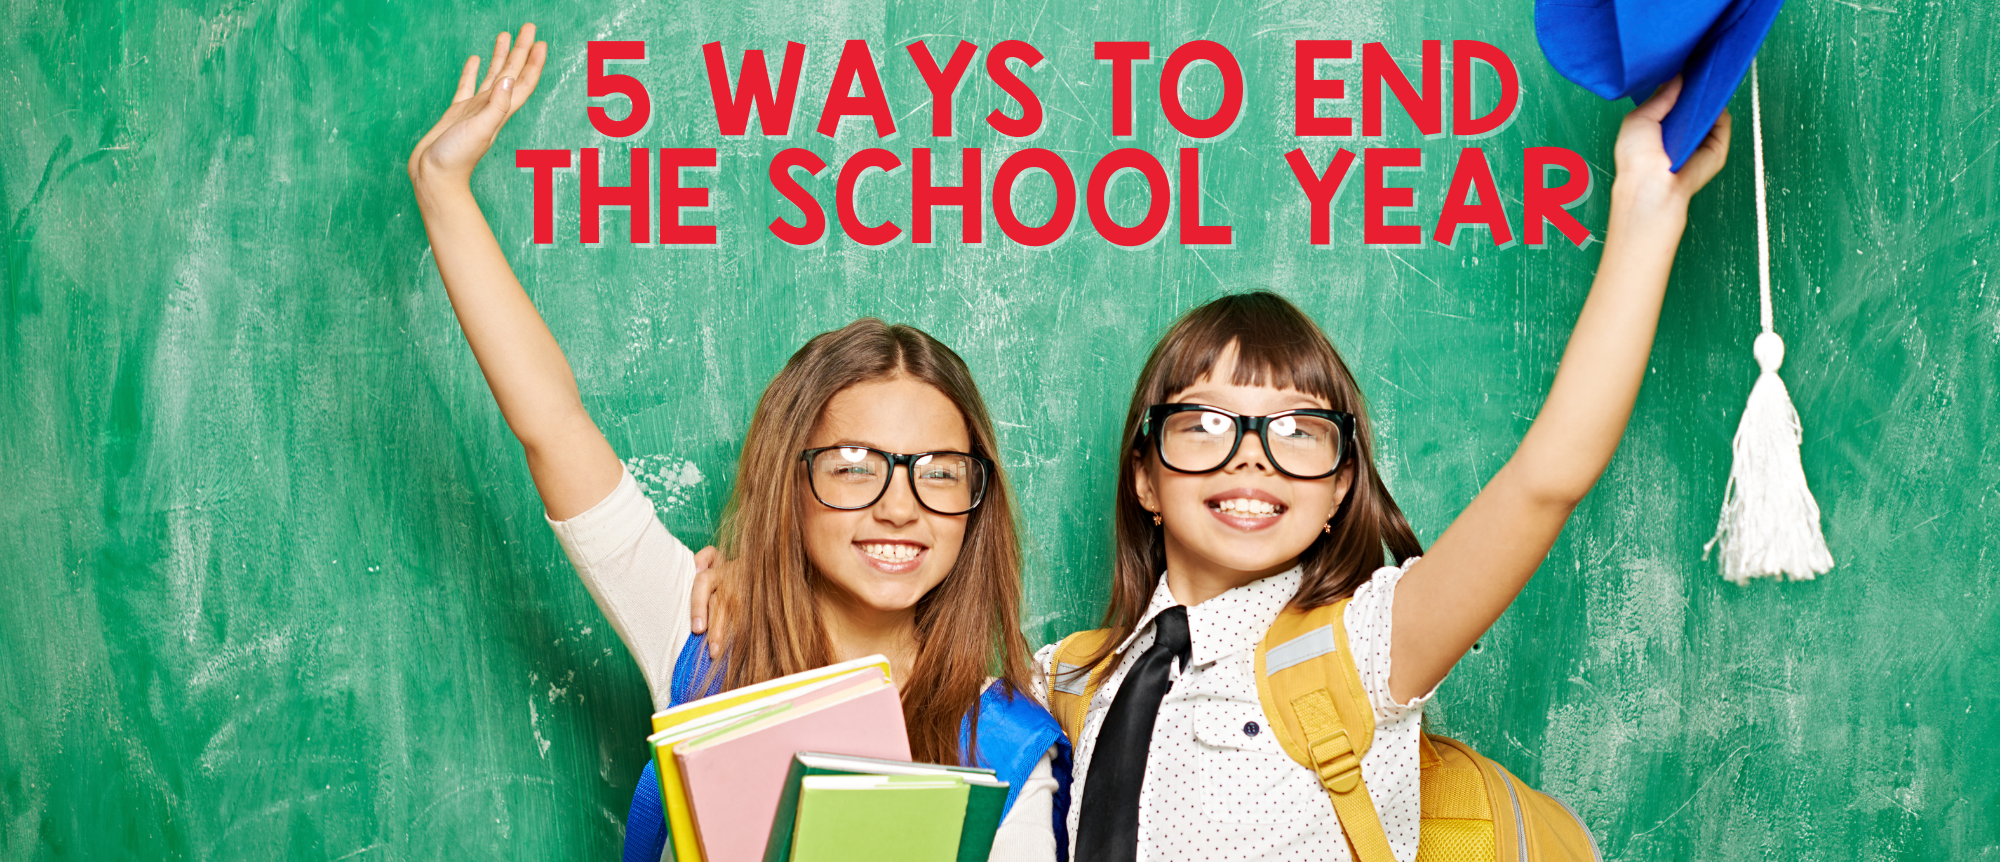 5 Ways to End the School Year